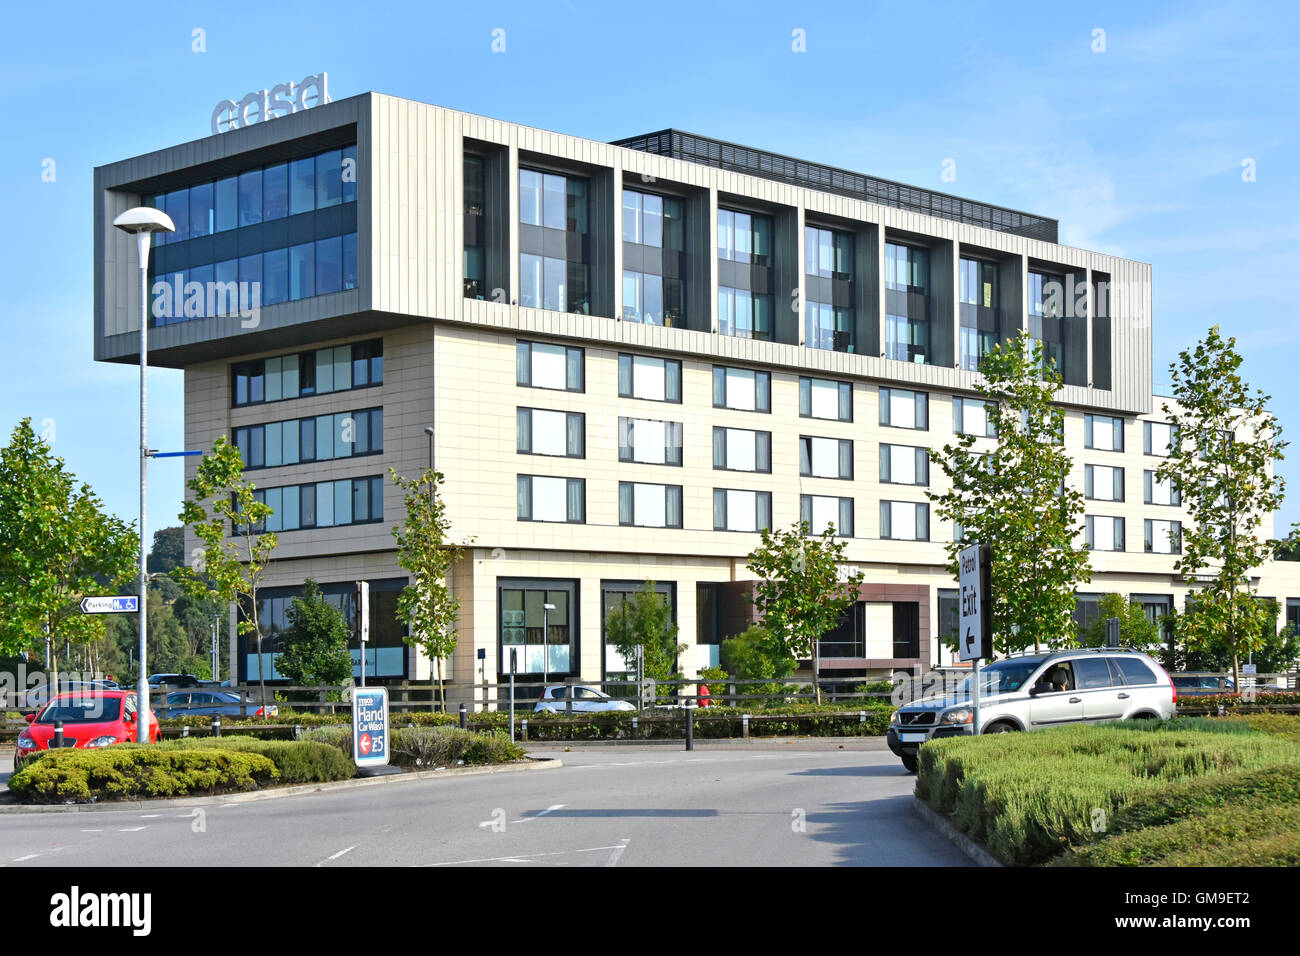 Casa luxury 4 star English UK hotel building adjacent to supermarket store car wash in Chesterfield Derbyshire England UK Stock Photo